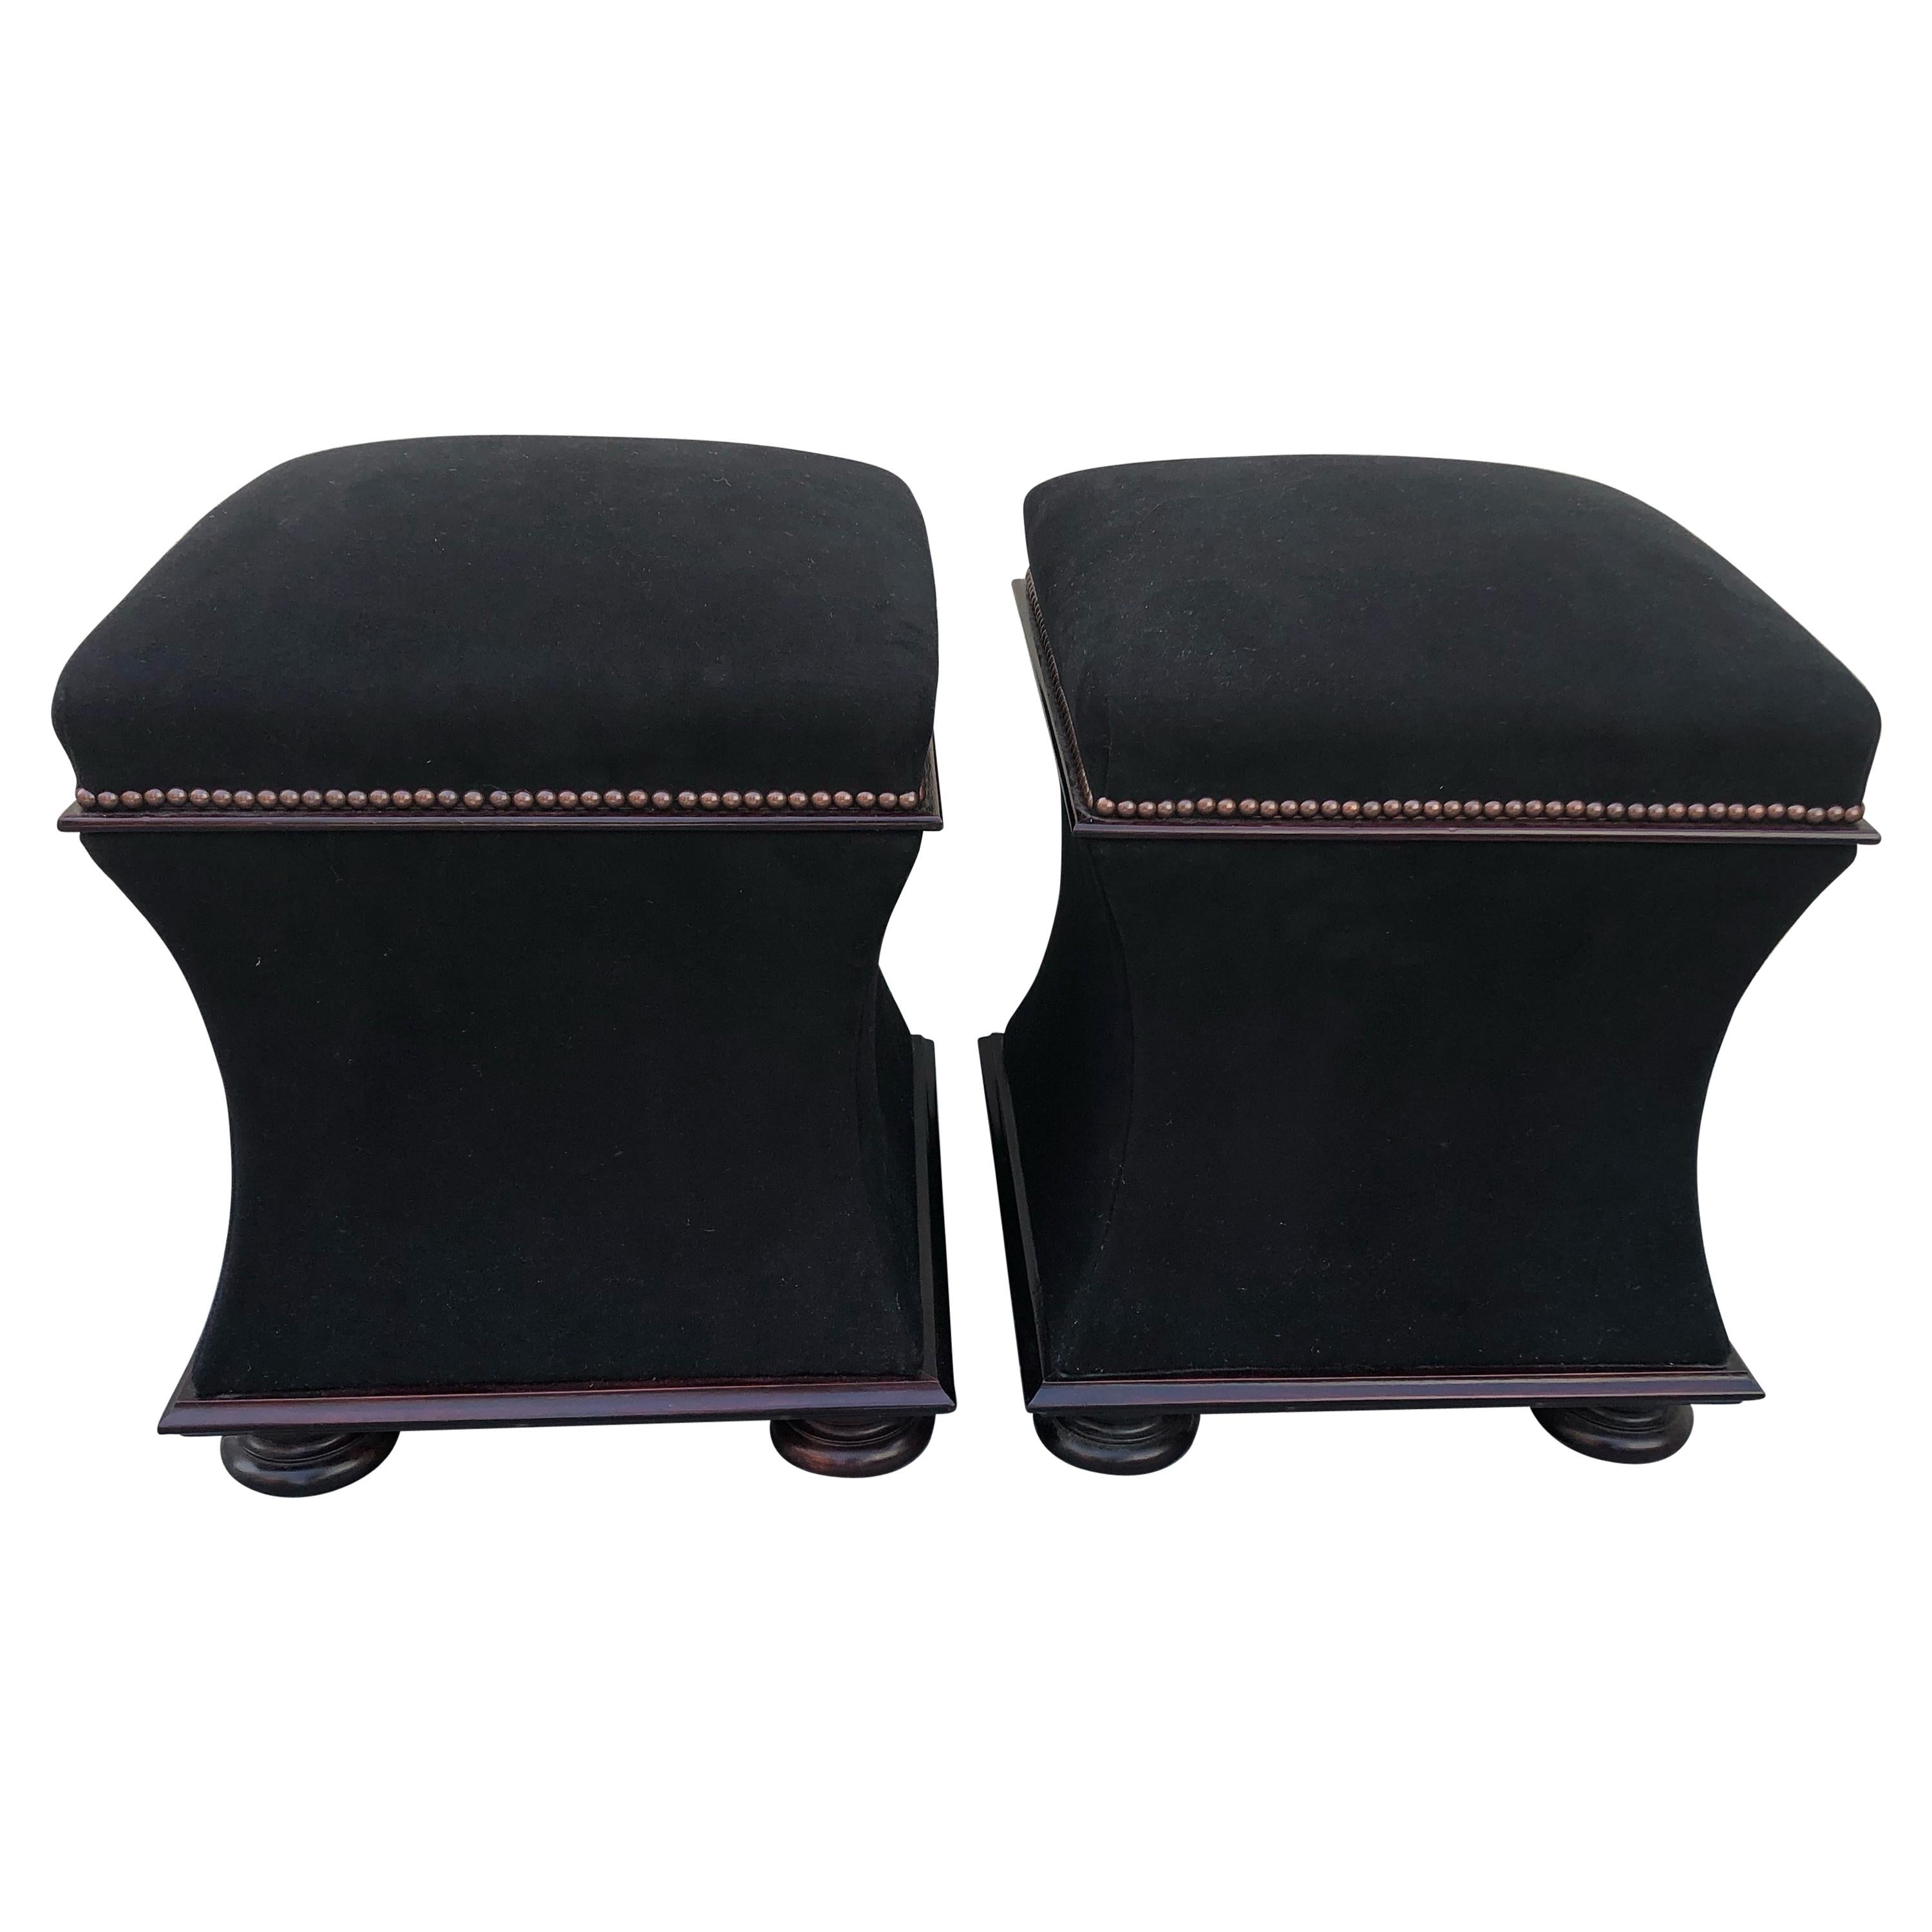 Plush Black Mohair & Mahogany Hourglass Ottomans with Storage by George Smith